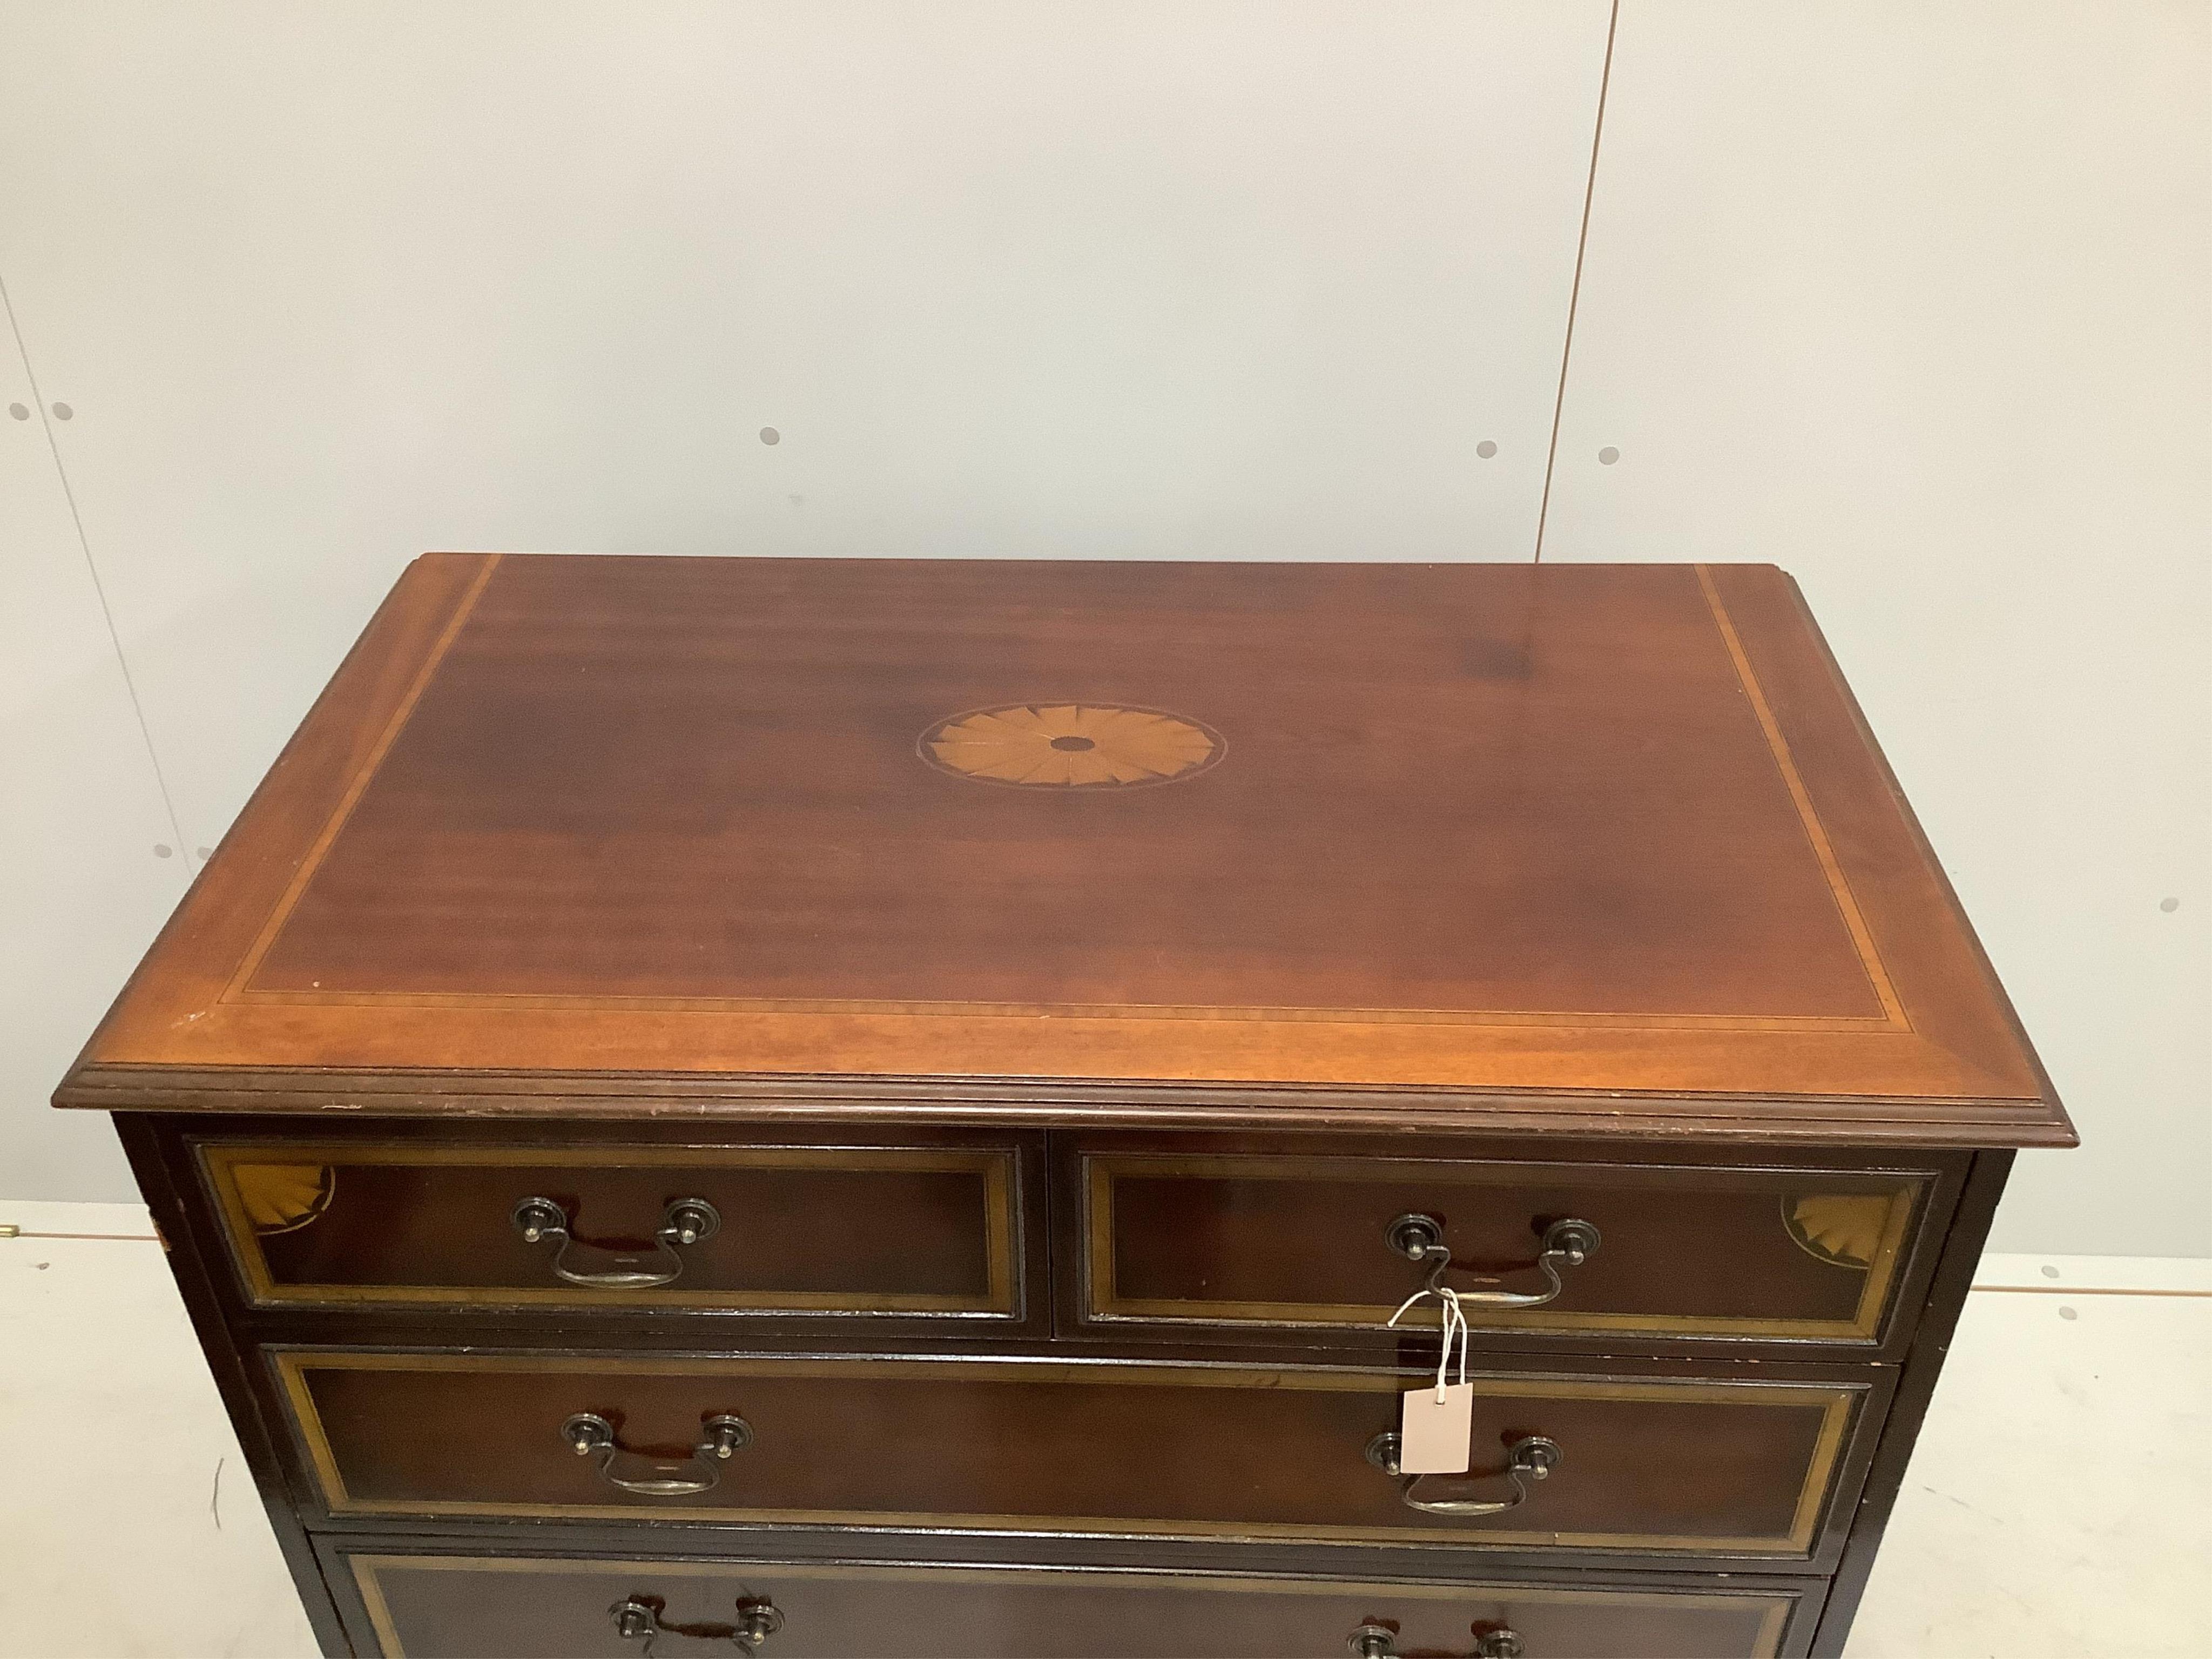 An Edwardian style inlaid mahogany chest of five drawers, width 94cm, depth 52cm, height 92cm